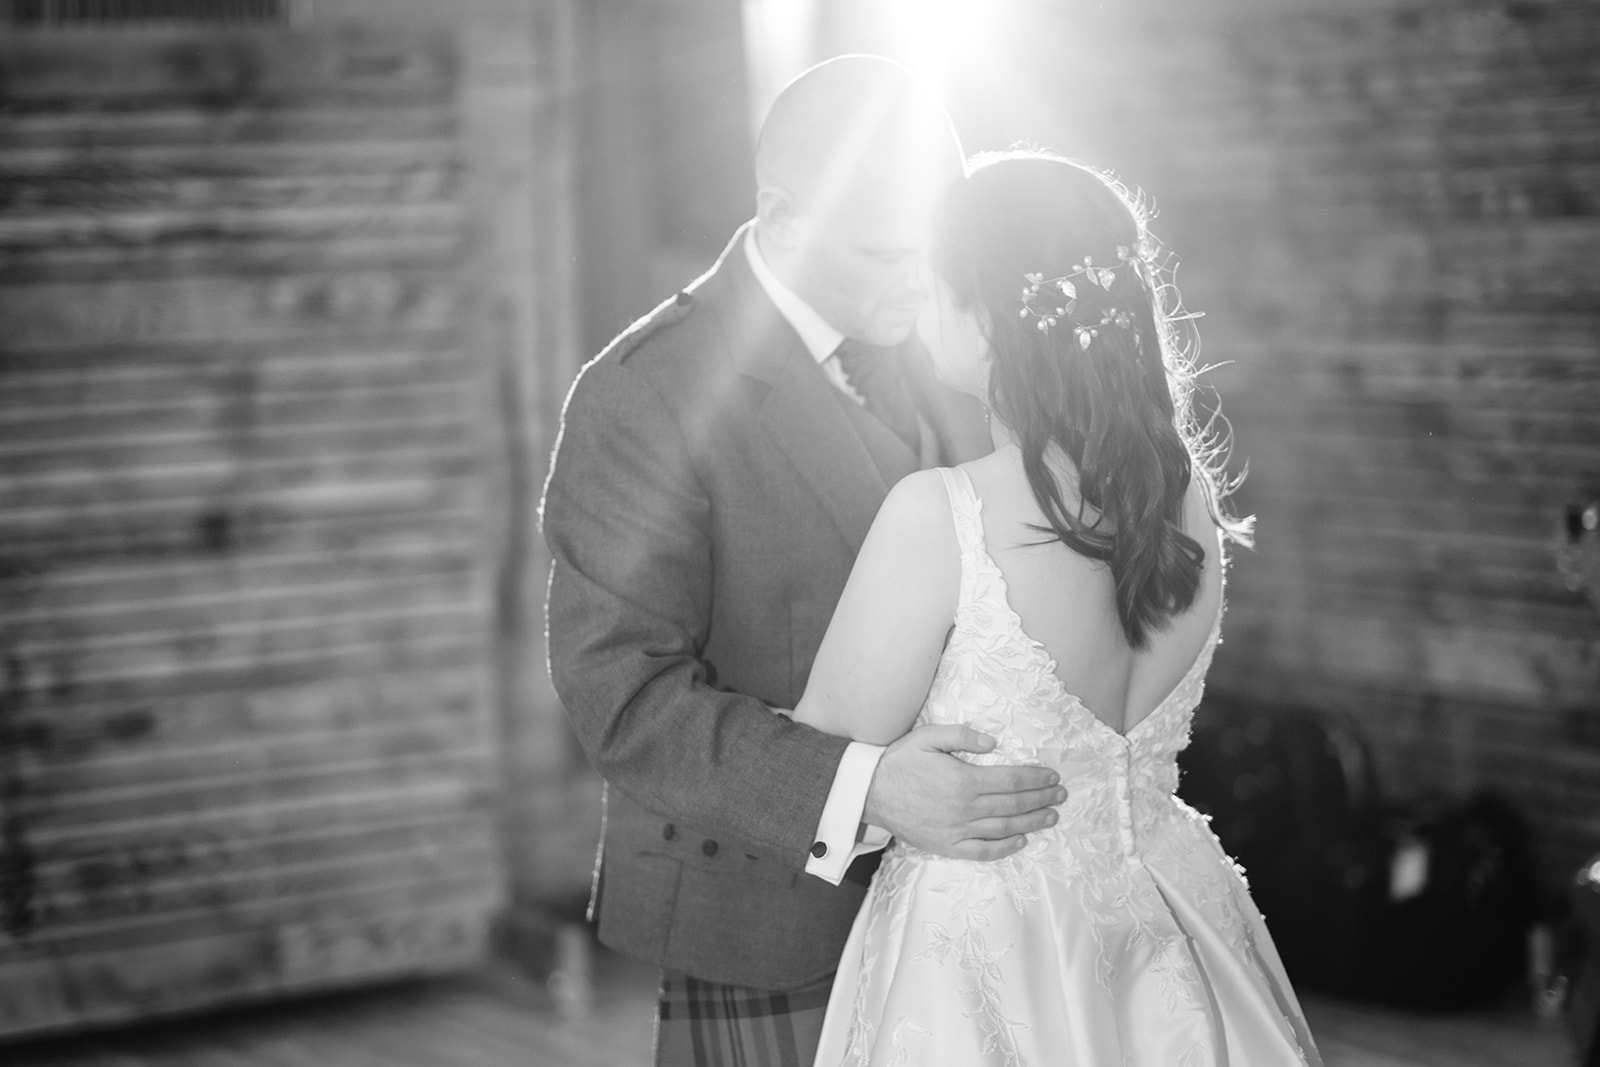 The married couple share their first wedding dance in front of their guests at Silverlodge, in Perthshire, Scotland.